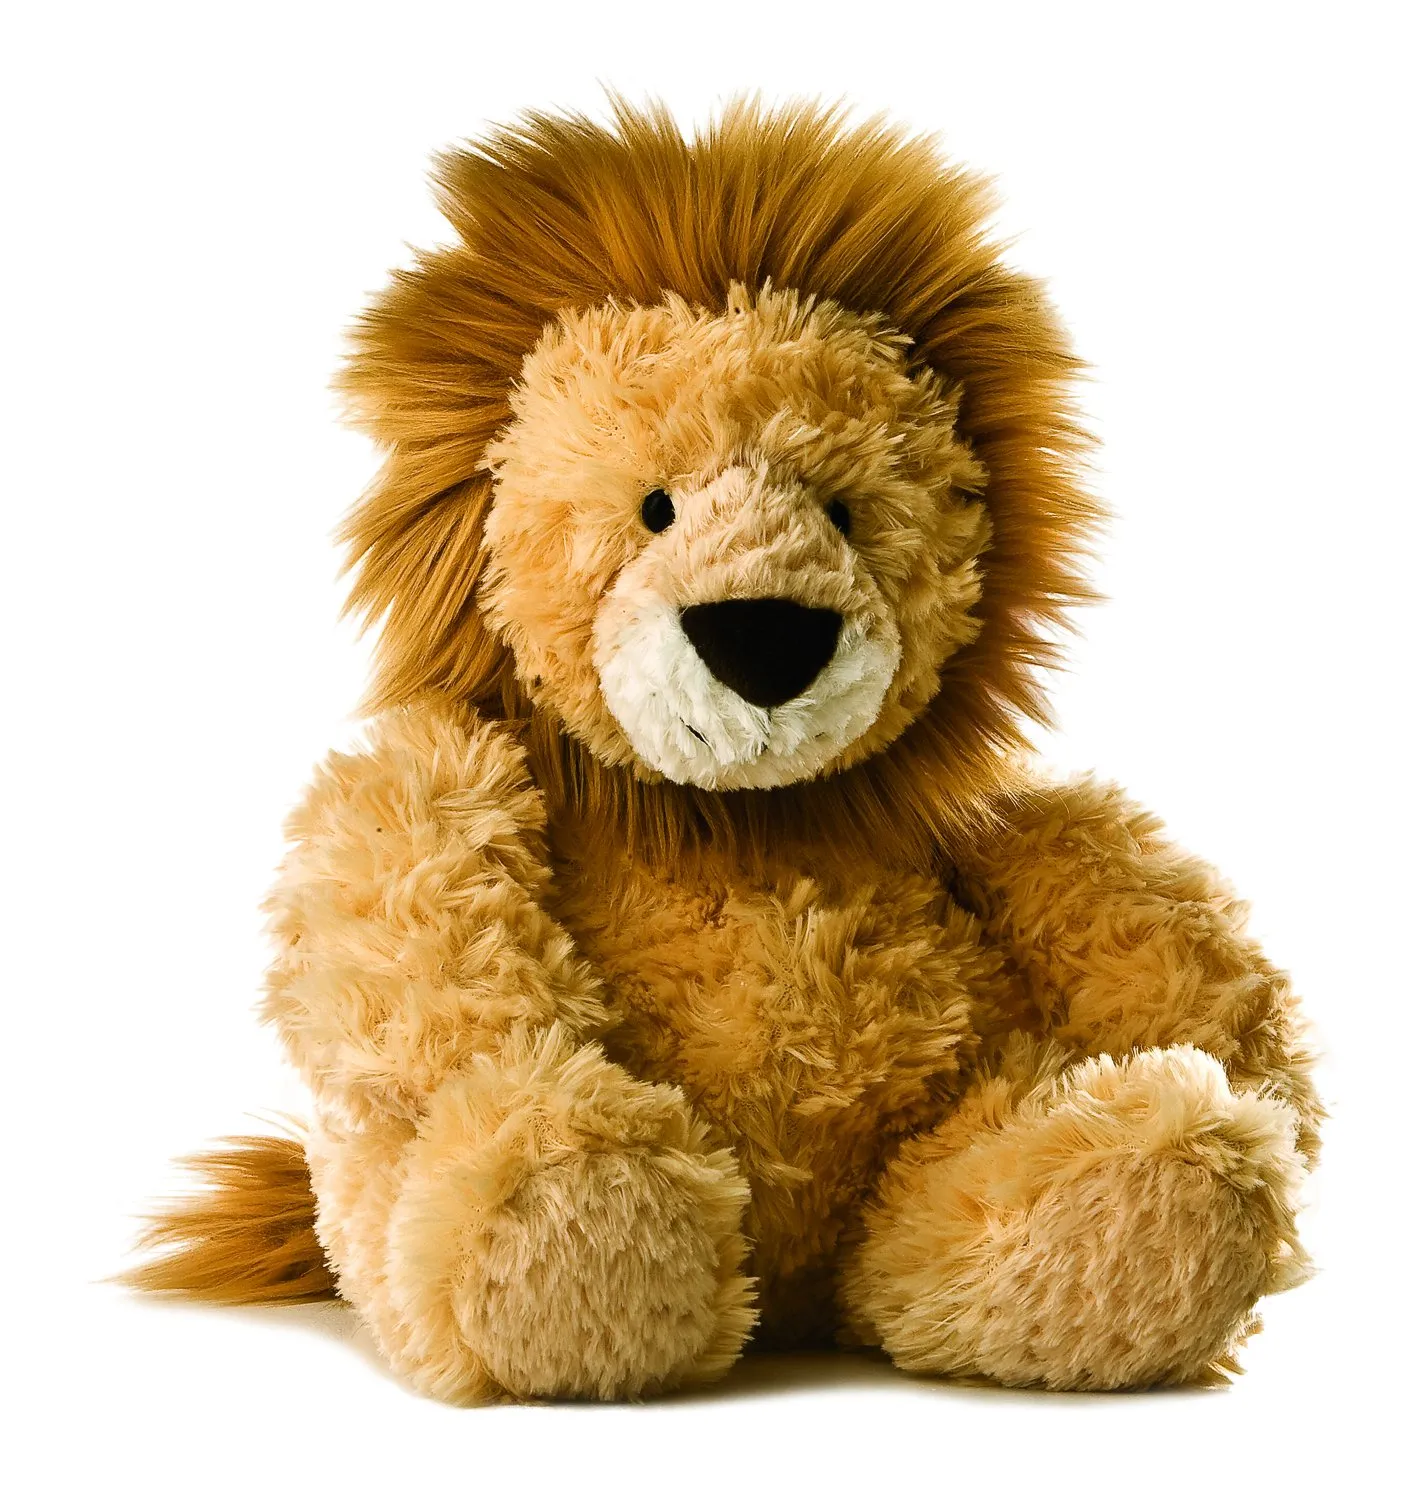 A stuffed golden lion with irresistibly squishy tummy.